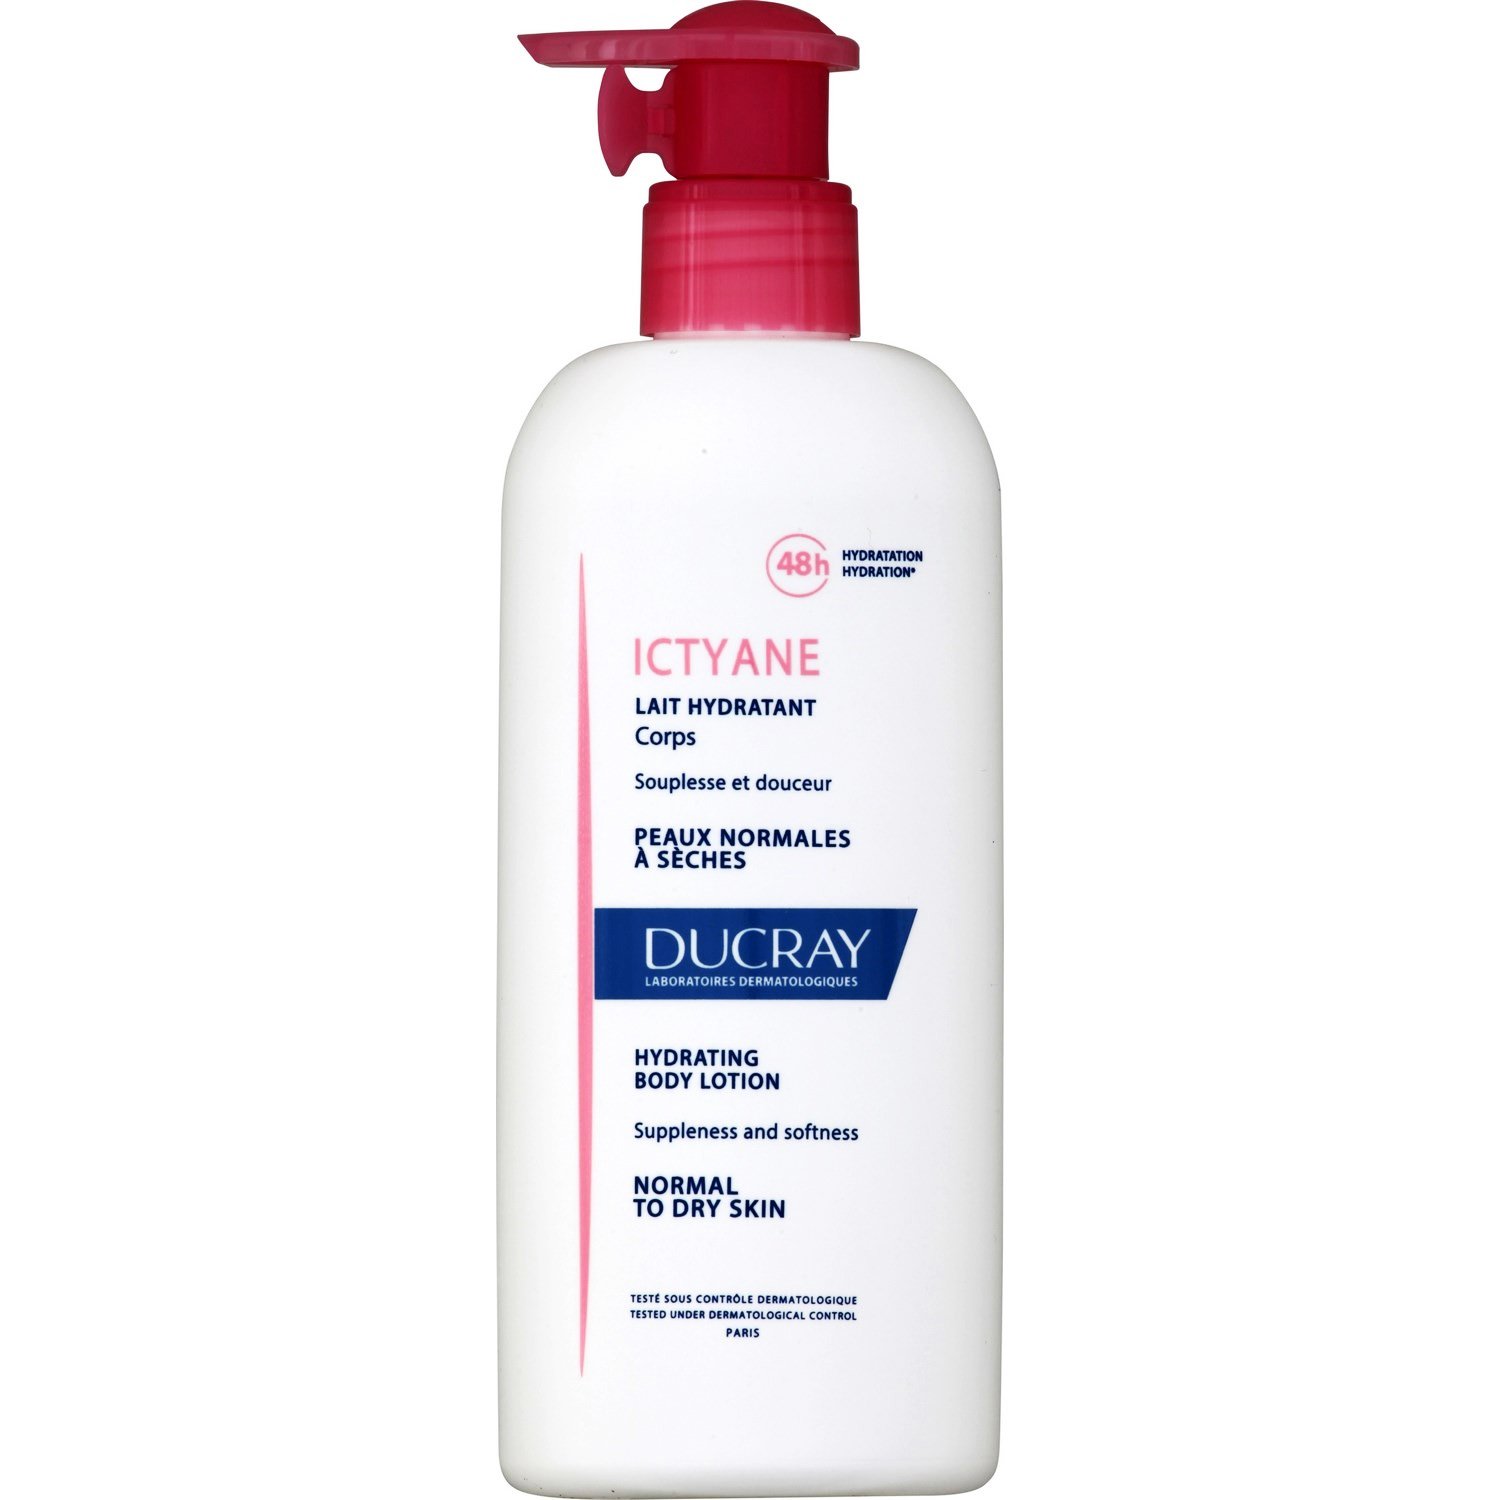 Ducray Ictyane Lait Hydratant Corps Normal to Dry Skin Ενυδατικό Γαλάκτωμα Σώματος Κανονικό προς Ξηρό Δέρμα 400ml